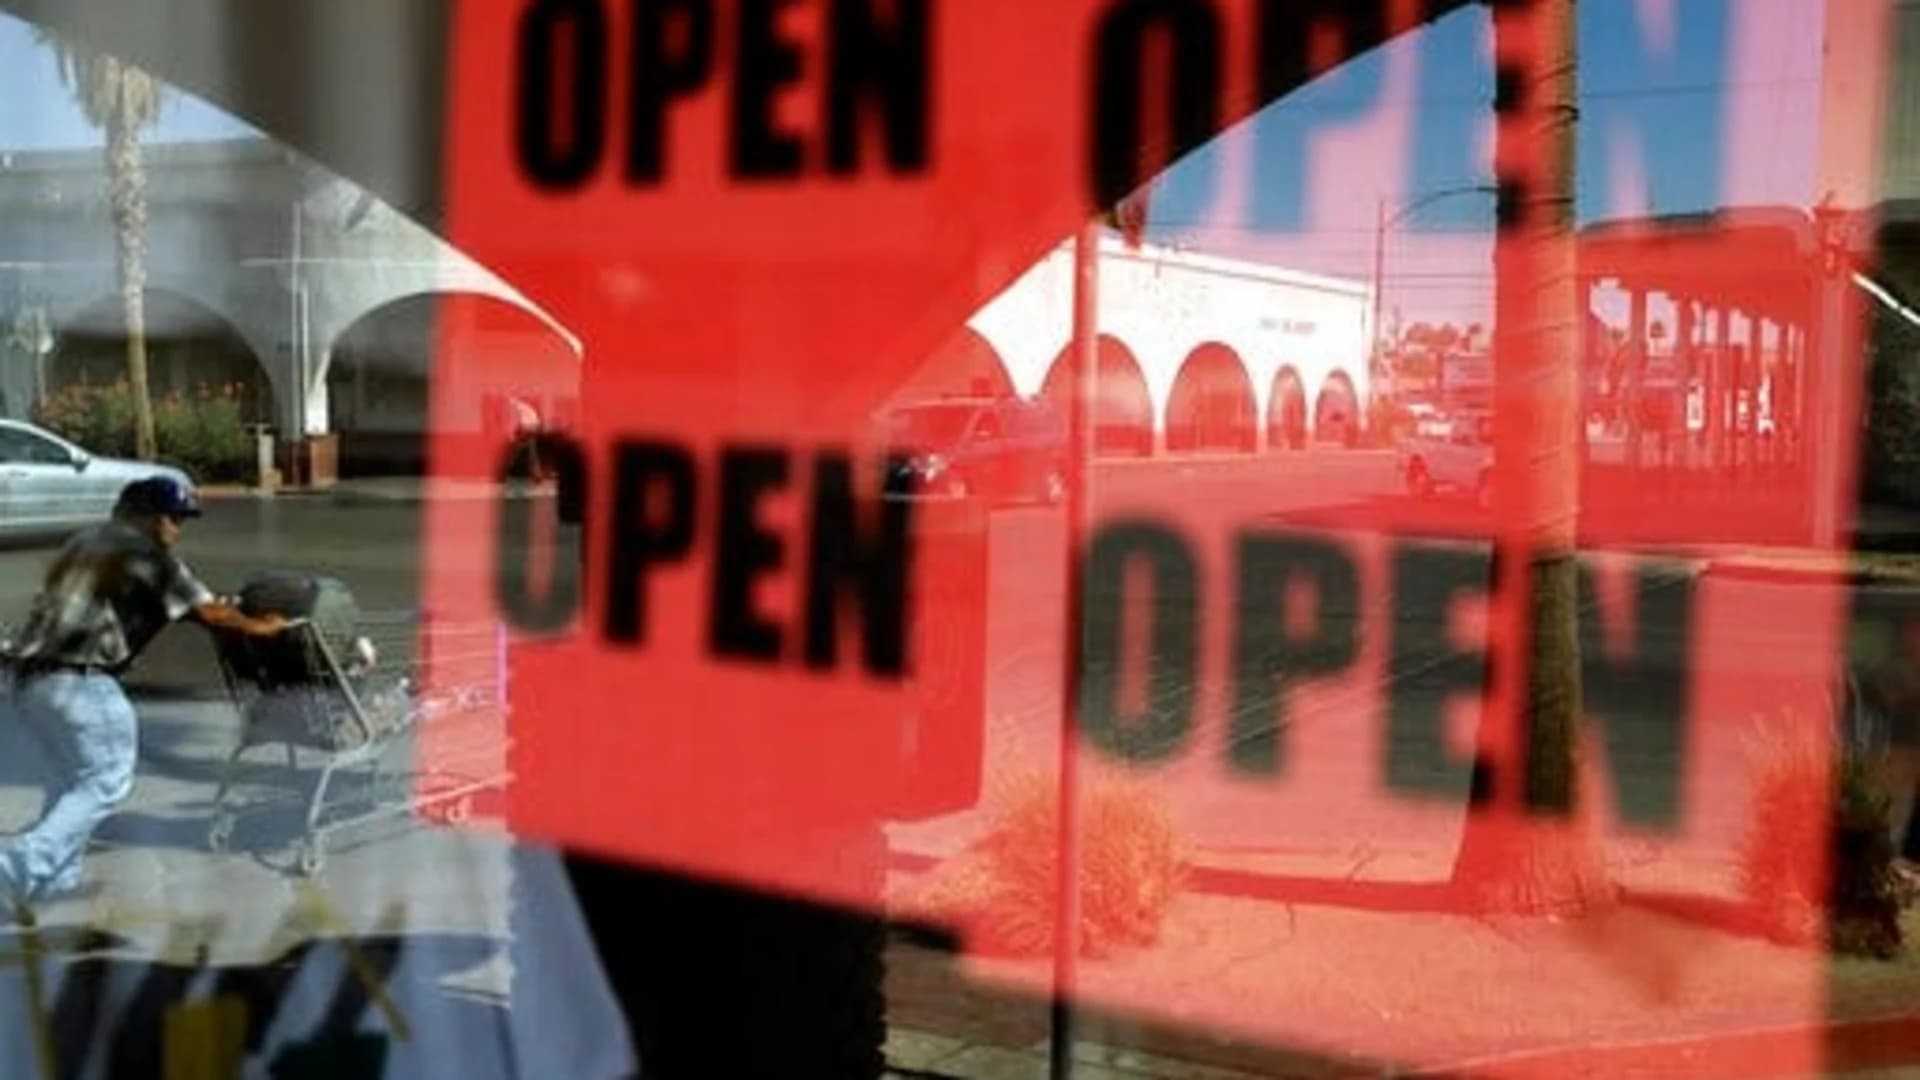 'We're Open' - Featuring the recovery of local businesses, July 31, 2020